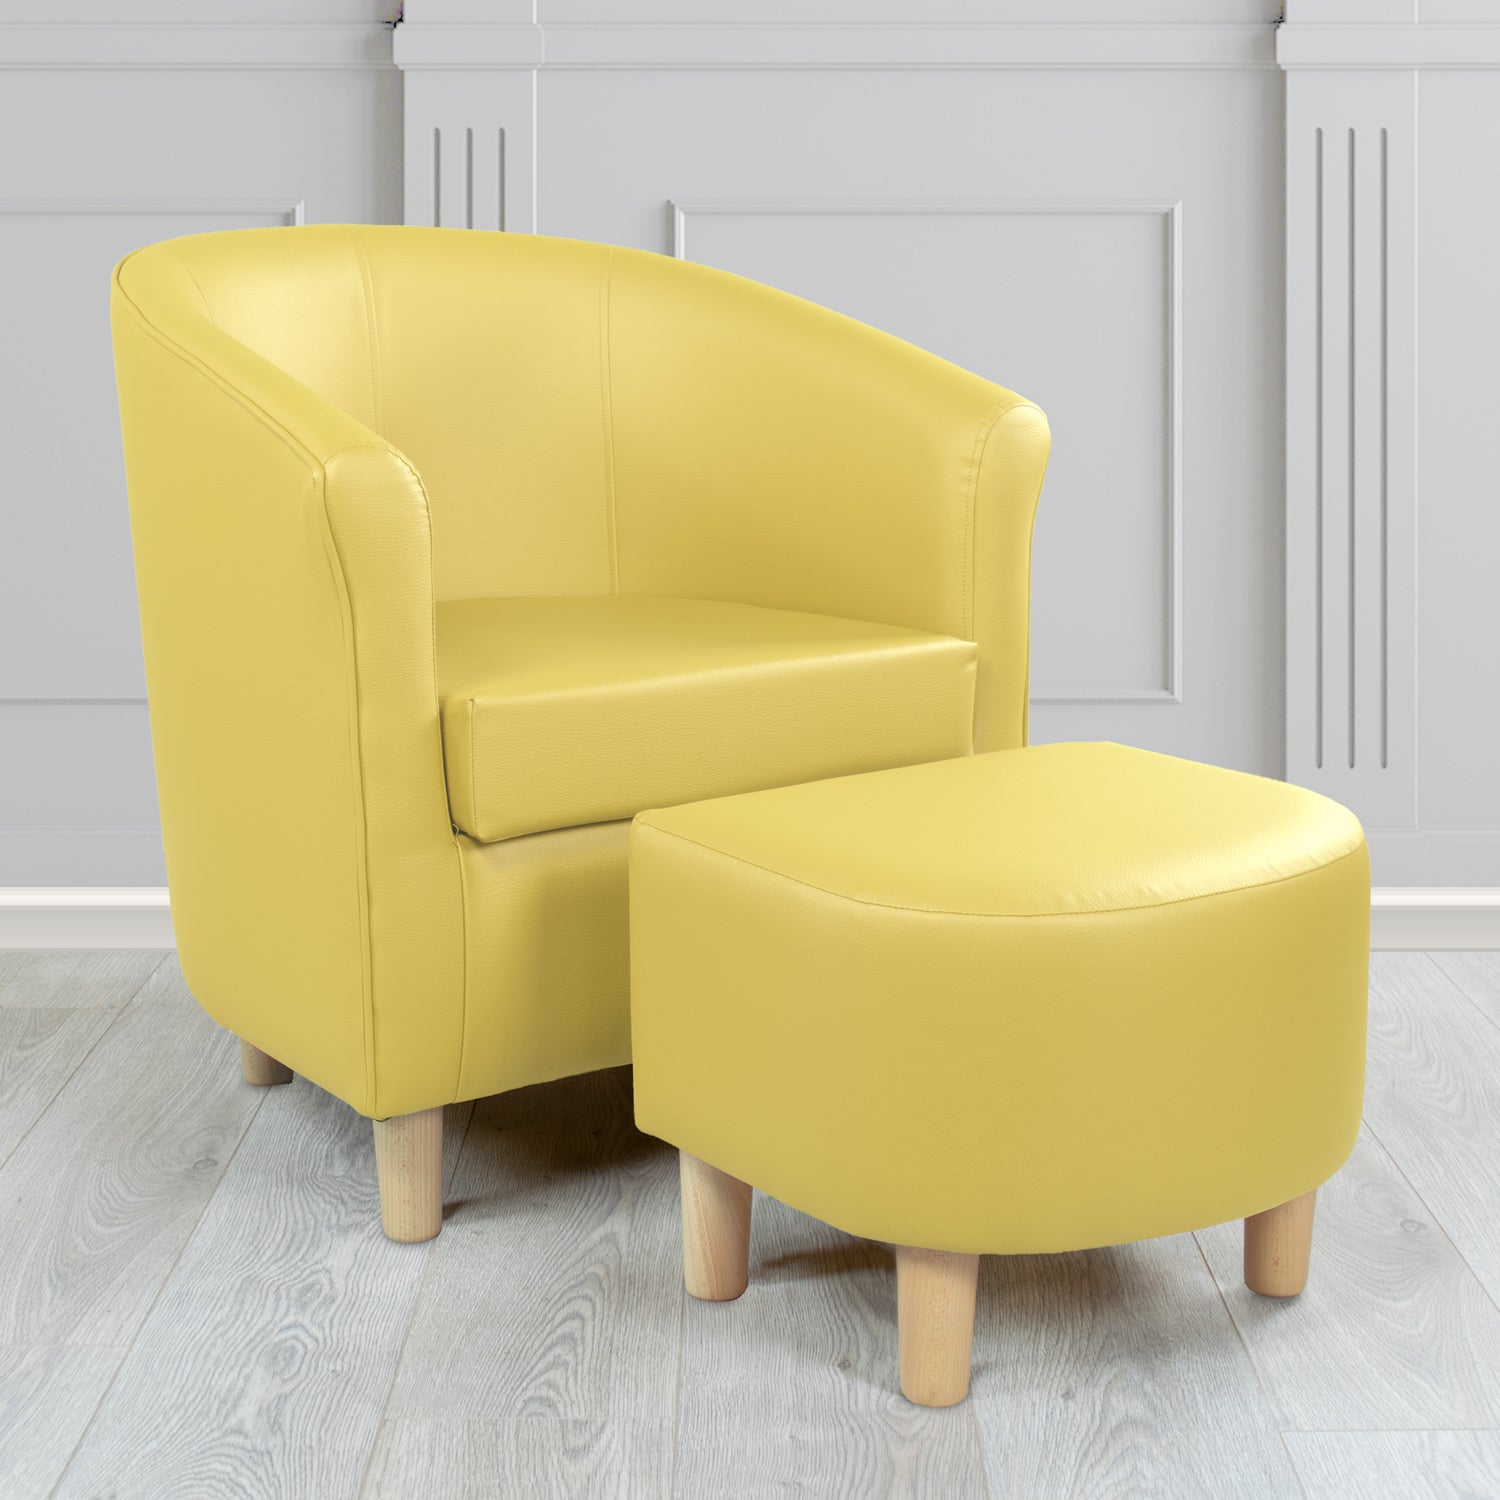 Tuscany Just Colour Primrose Faux Leather Tub Chair with Footstool Set - The Tub Chair Shop